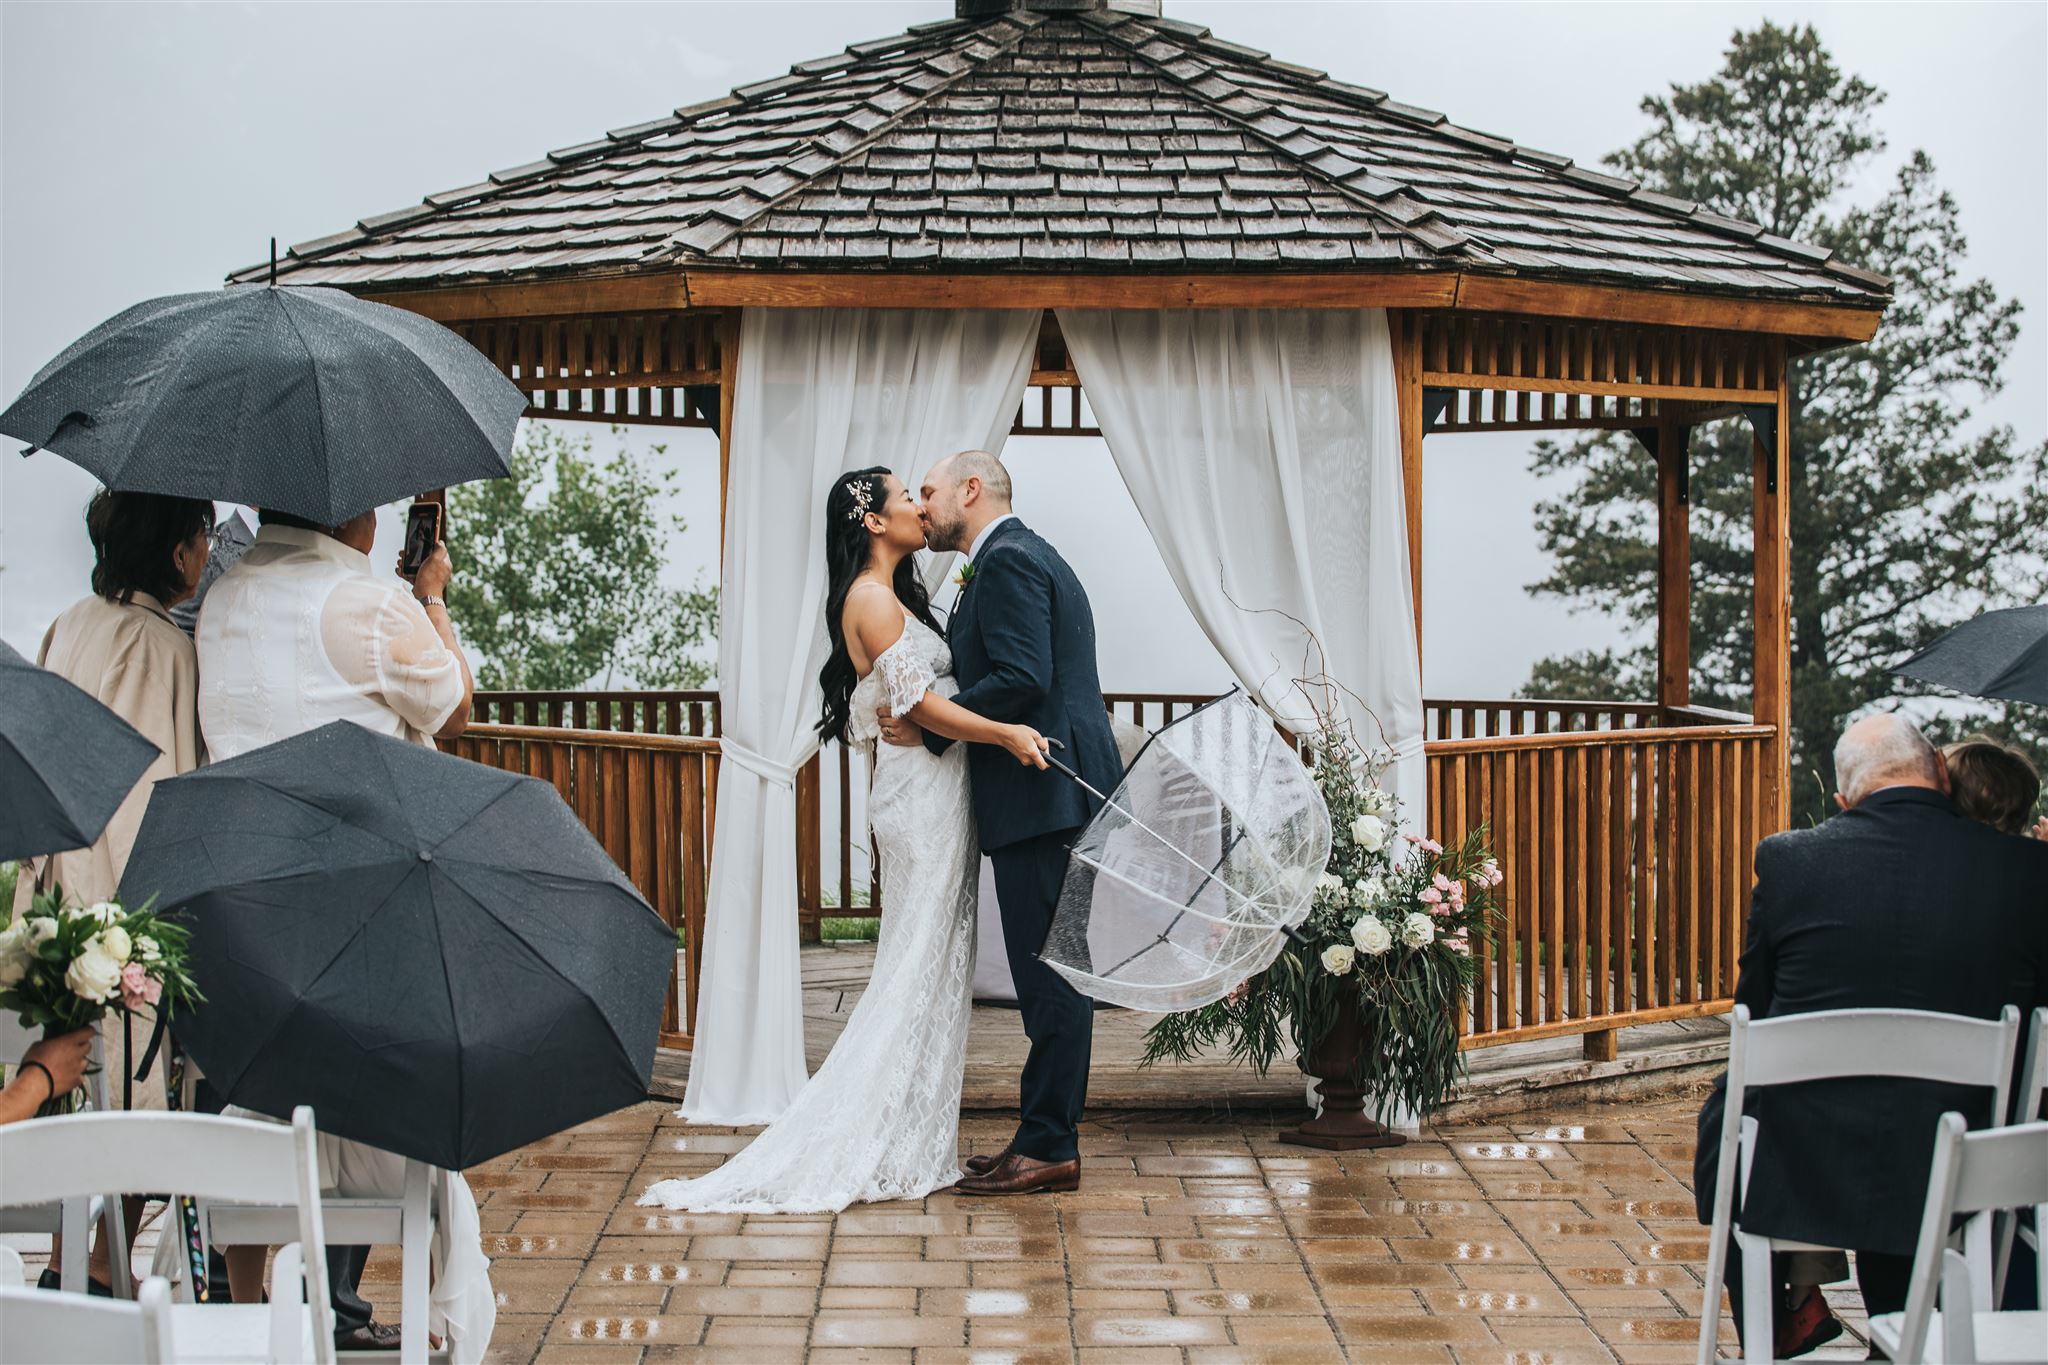 Bride and Groom first kiss during wedding ceremony in the rain at silvertip resort in canmore, alberta